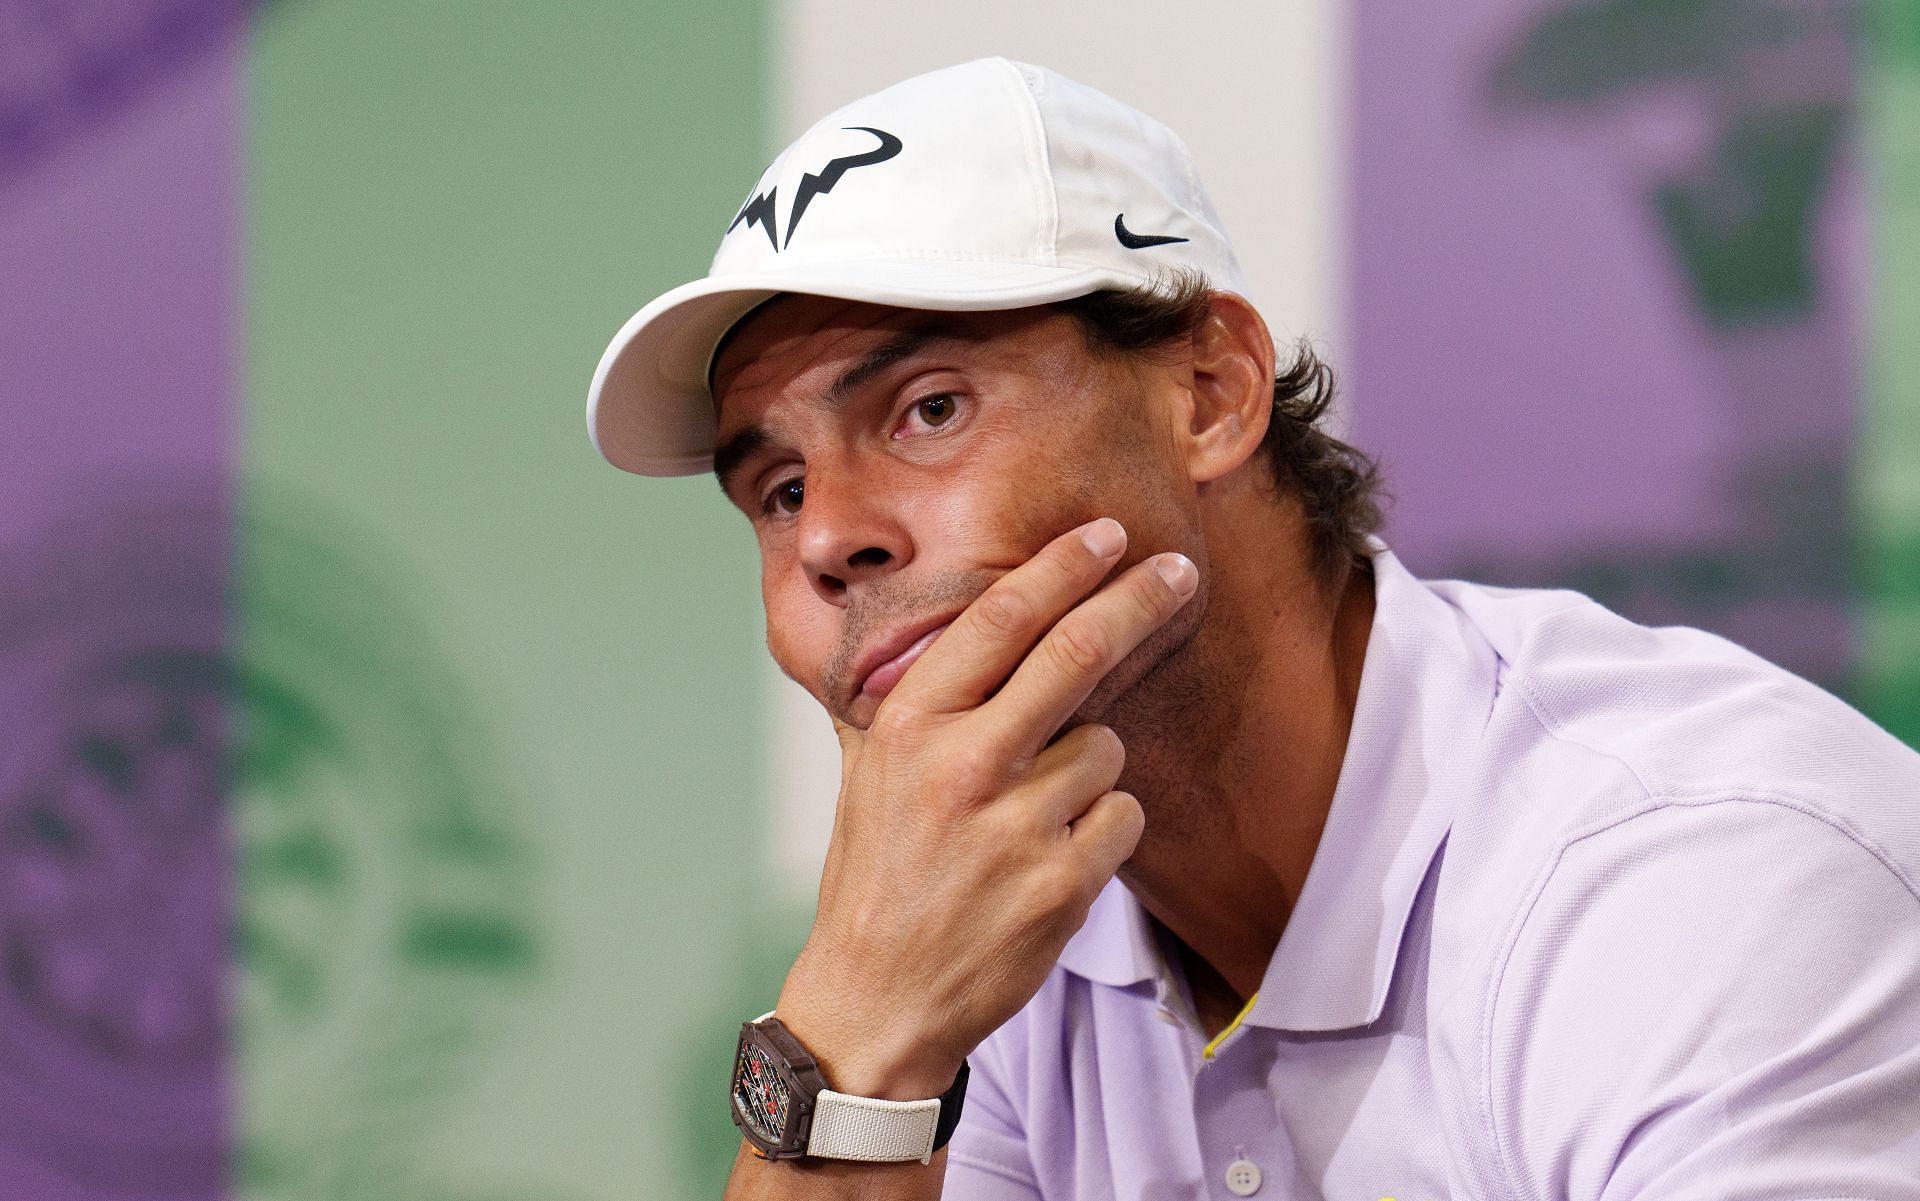 Rafael Nadal expects to have a good 2023 season